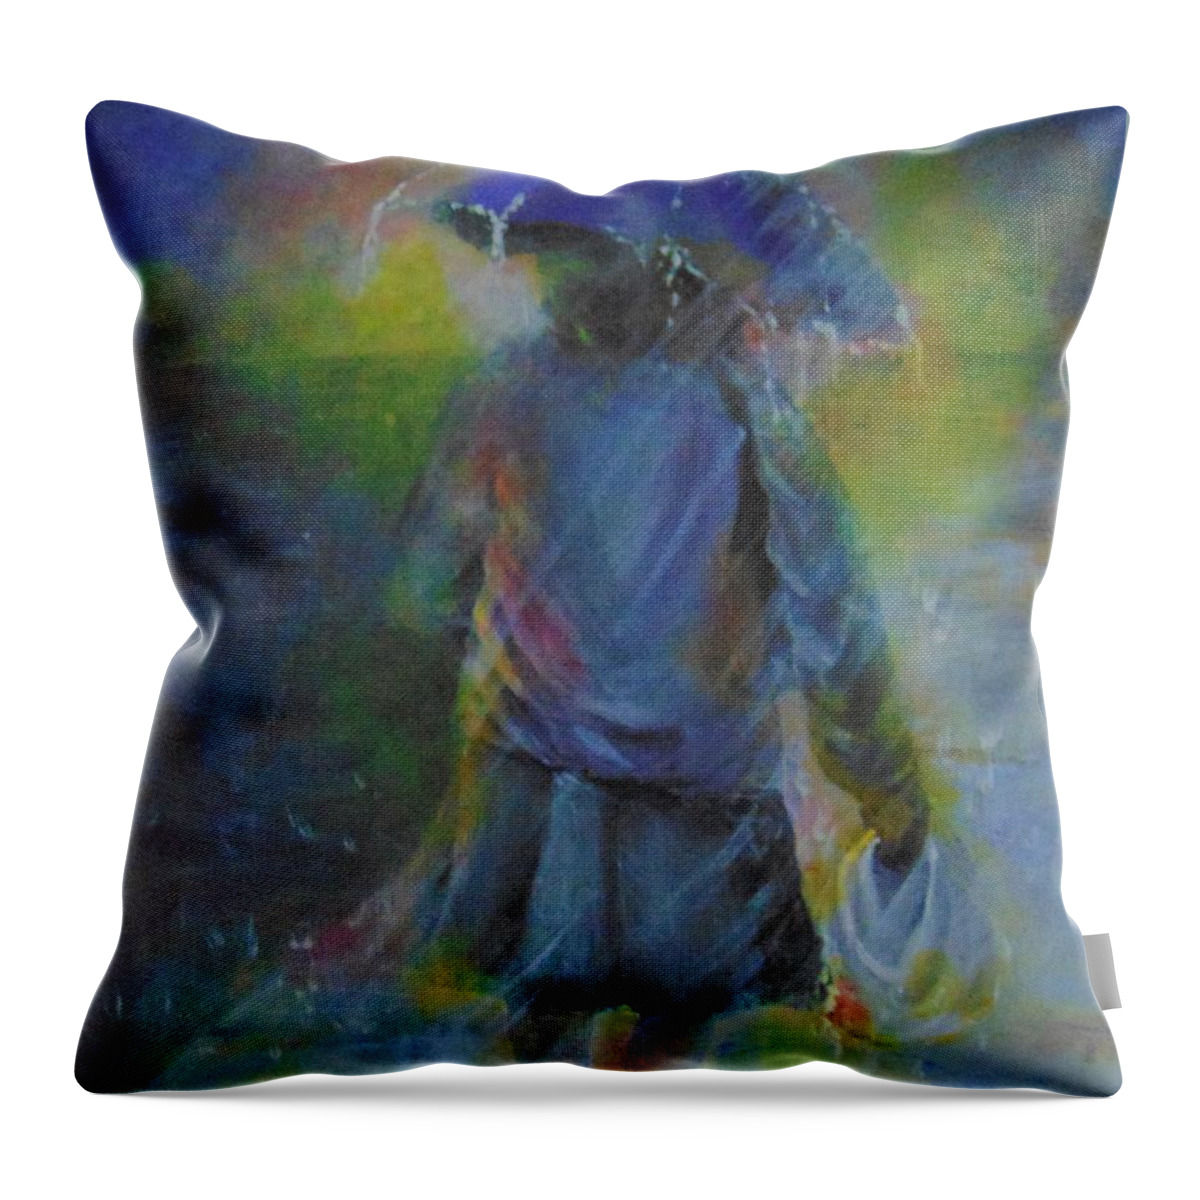 Acrylic Throw Pillow featuring the painting The Year 2020 by Saundra Johnson